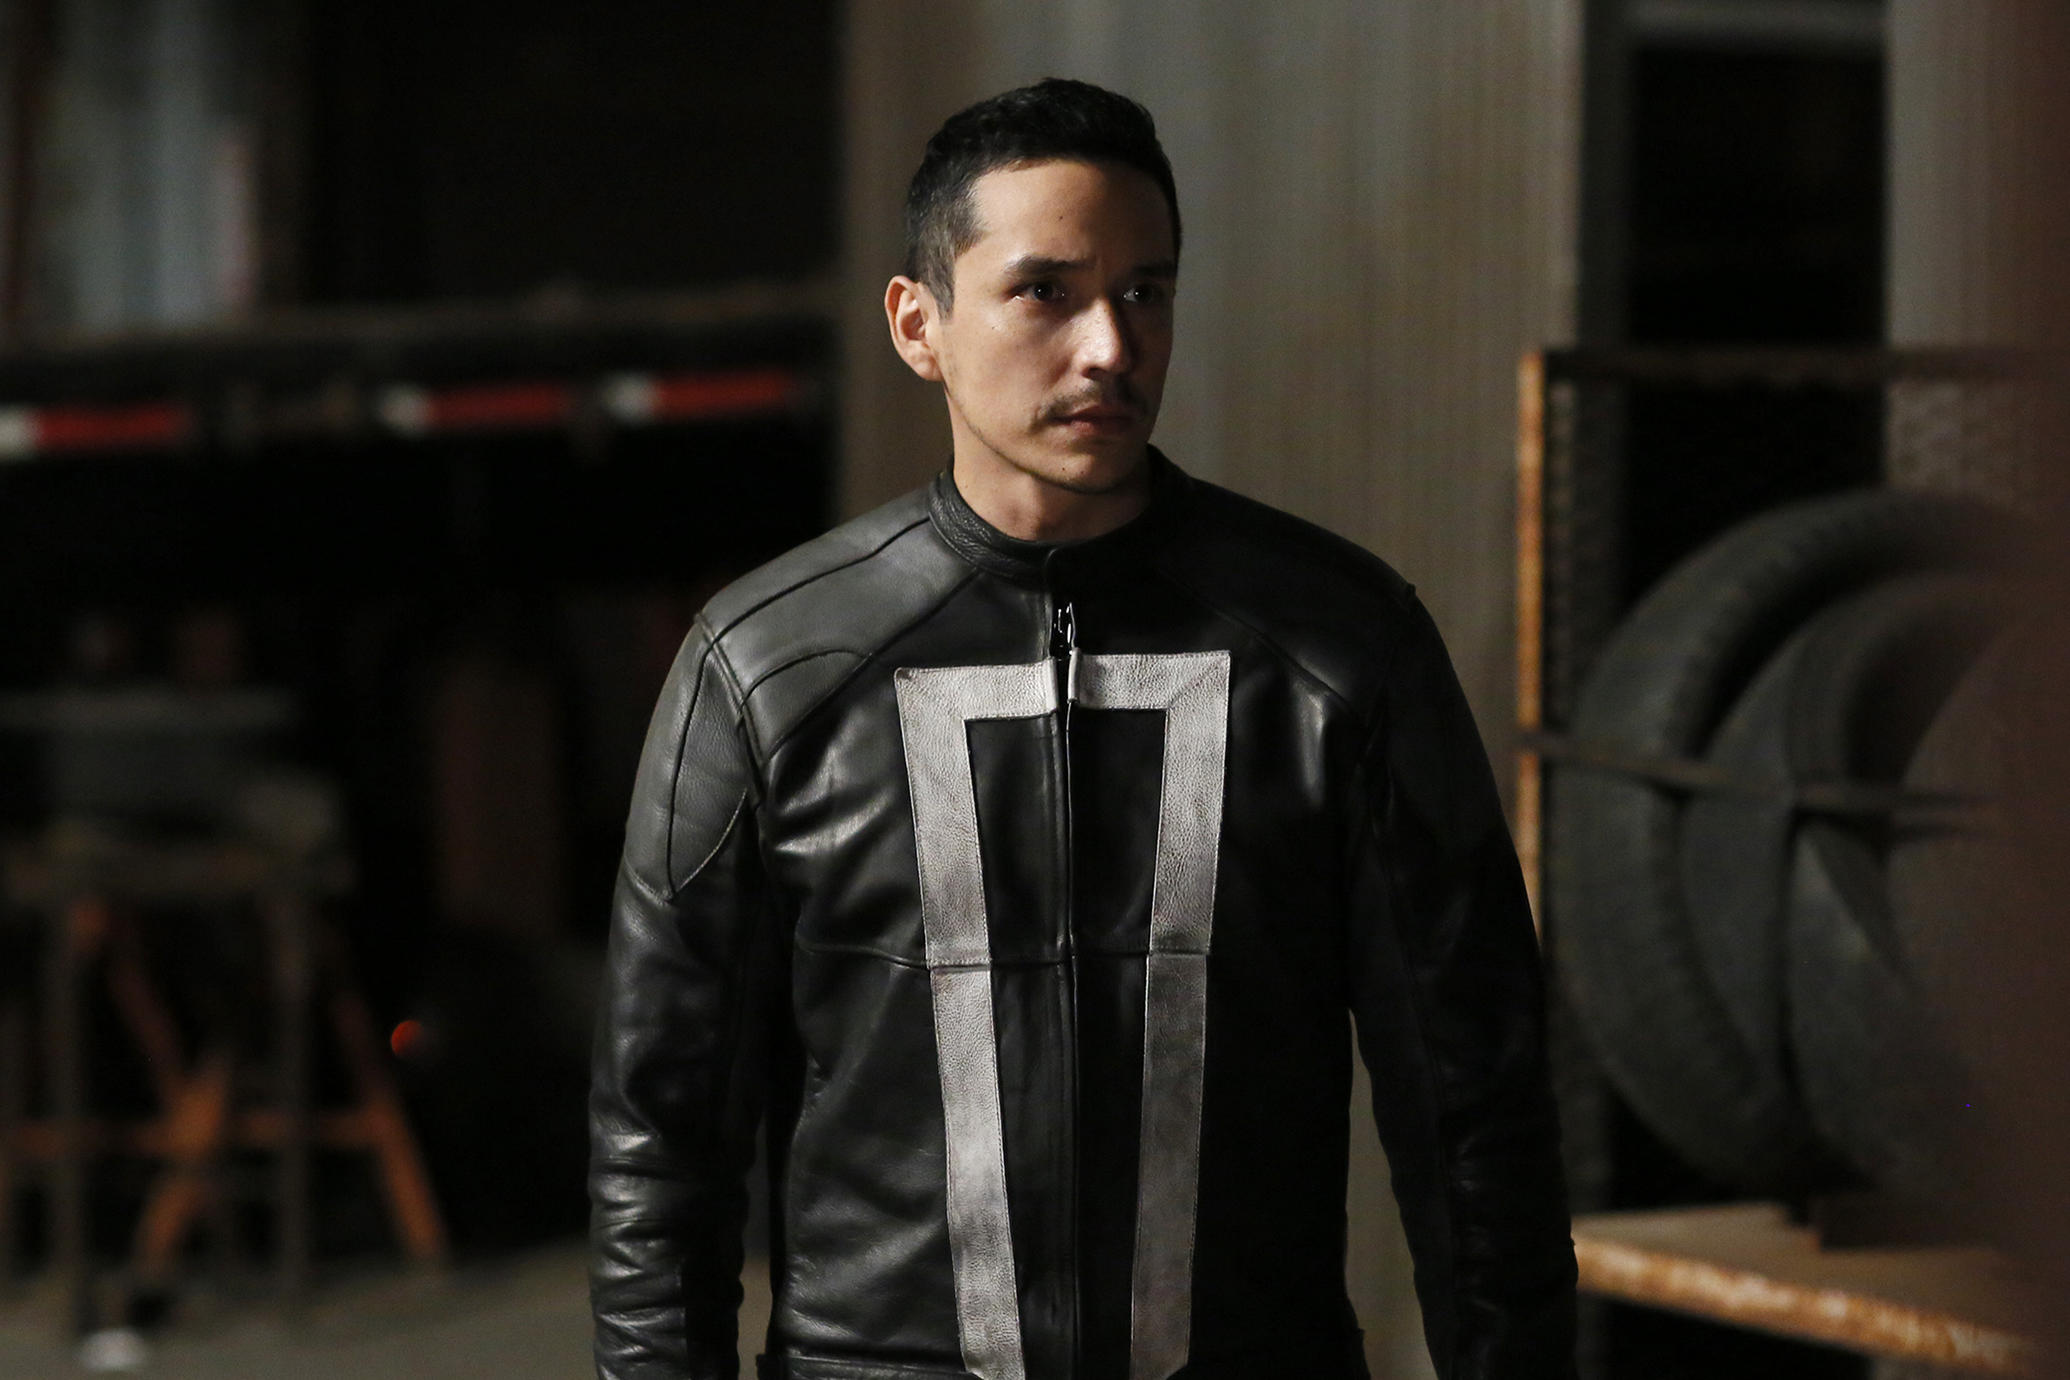 MARVEL'S AGENTS OF S.H.I.E.L.D. - "The Ghost" - In the season premiere episode, "The Ghost," Ghost Rider is coming, and S.H.I.E.L.D will never be the same. "Marvel's Agents of S.H.I.E.L.D." returns with a vengeance for the fourth exciting season in an all-new time period, TUESDAY, SEPTEMBER 20 (10:00-11:00 p.m. EDT), on the ABC Television Network. (ABC/Jennifer Clasen) GABRIEL LUNA